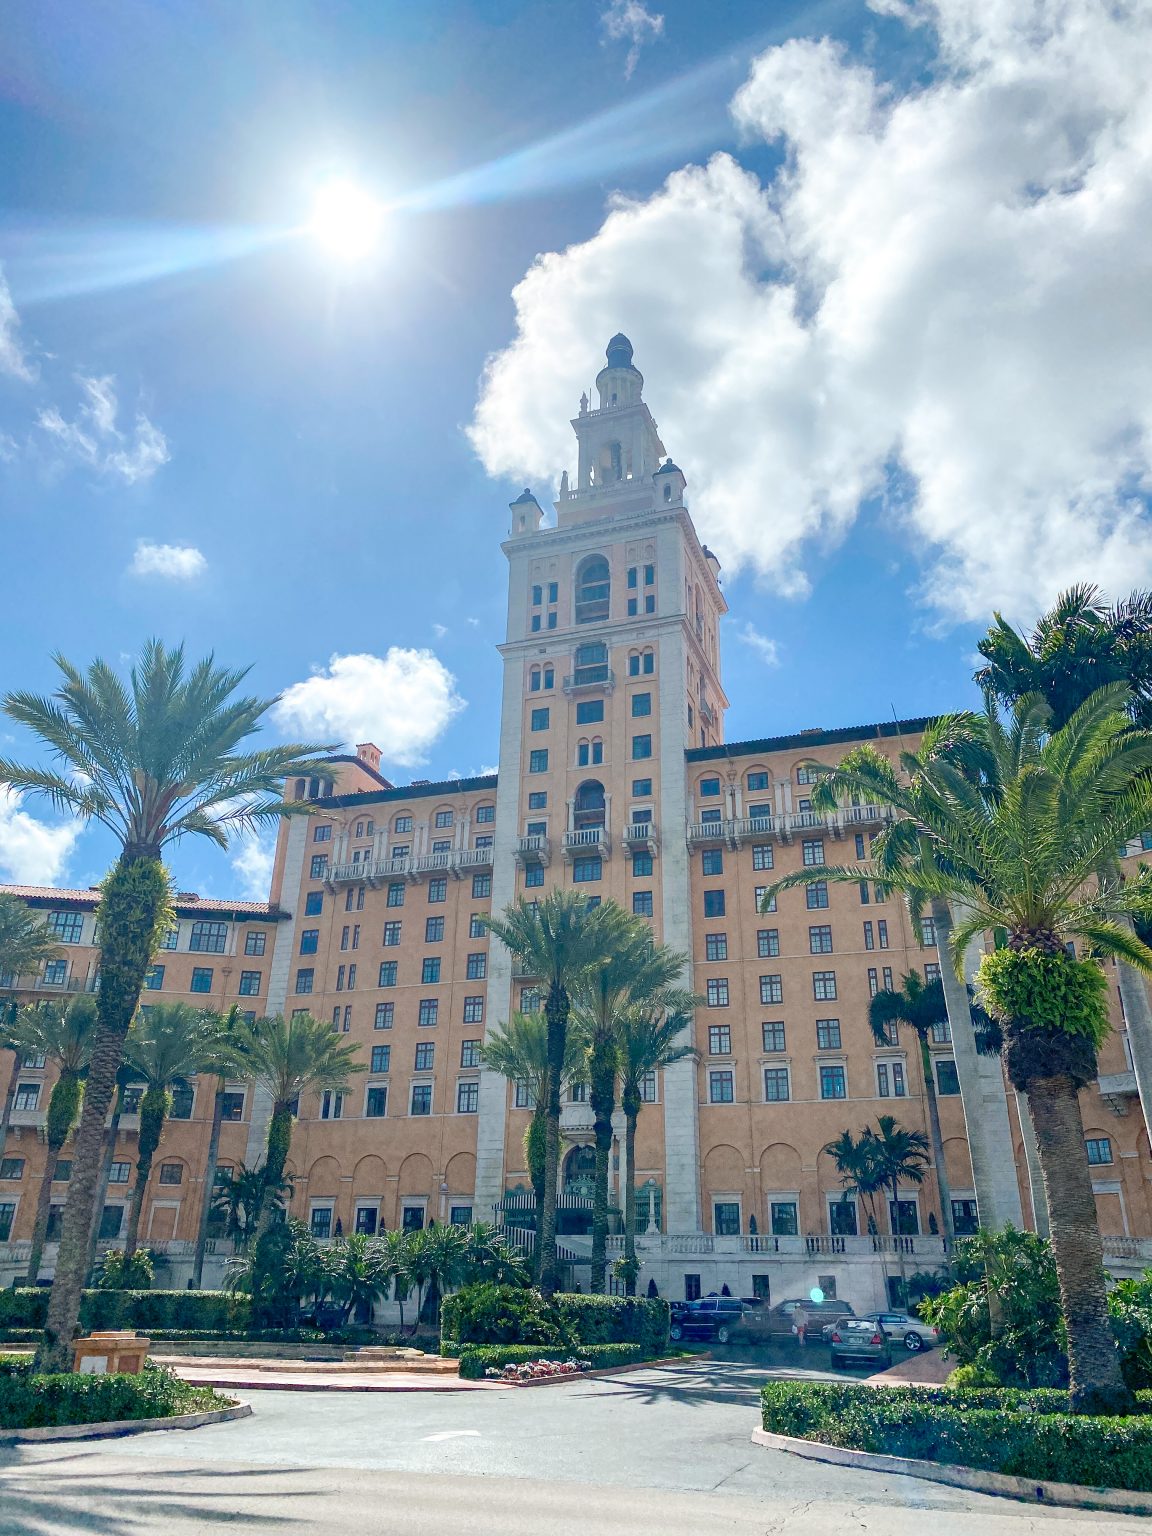 The Biltmore Hotel Miami: Is it for Families? - Amber Likes